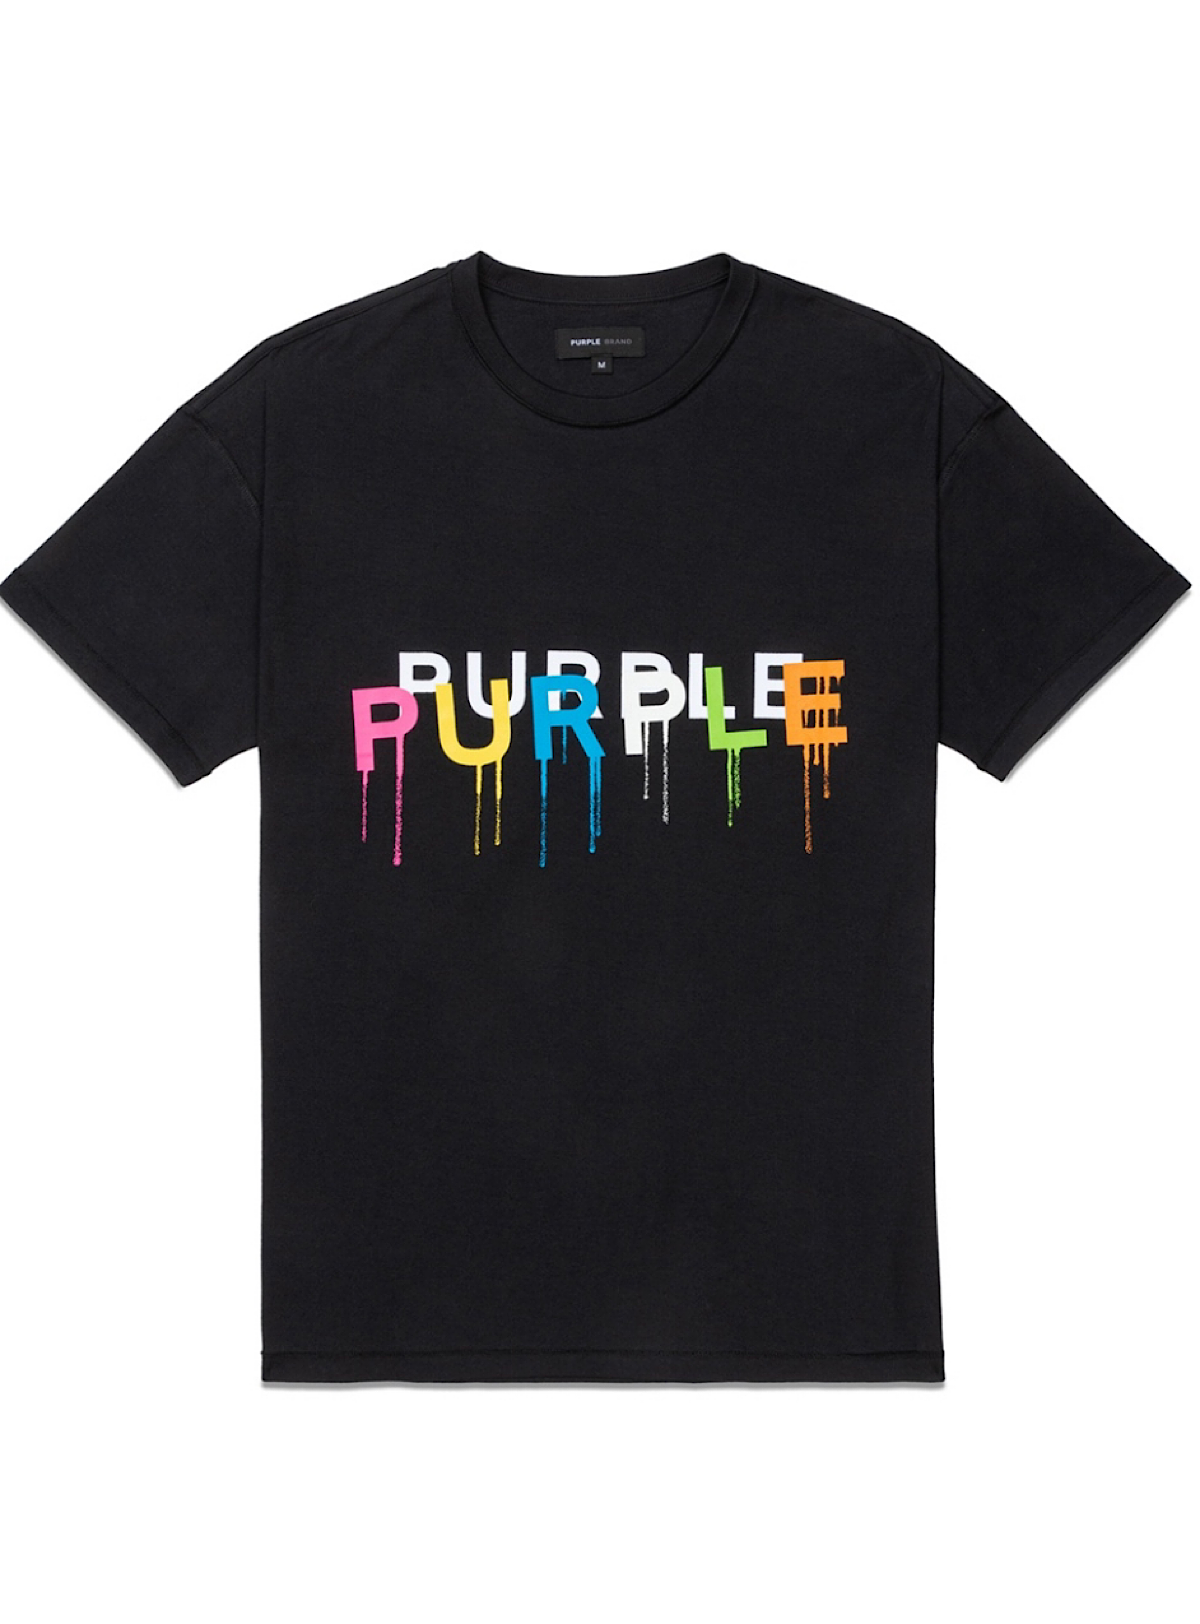 Purple-Brand T-Shirt - Textured Inside Out - Black And Multi